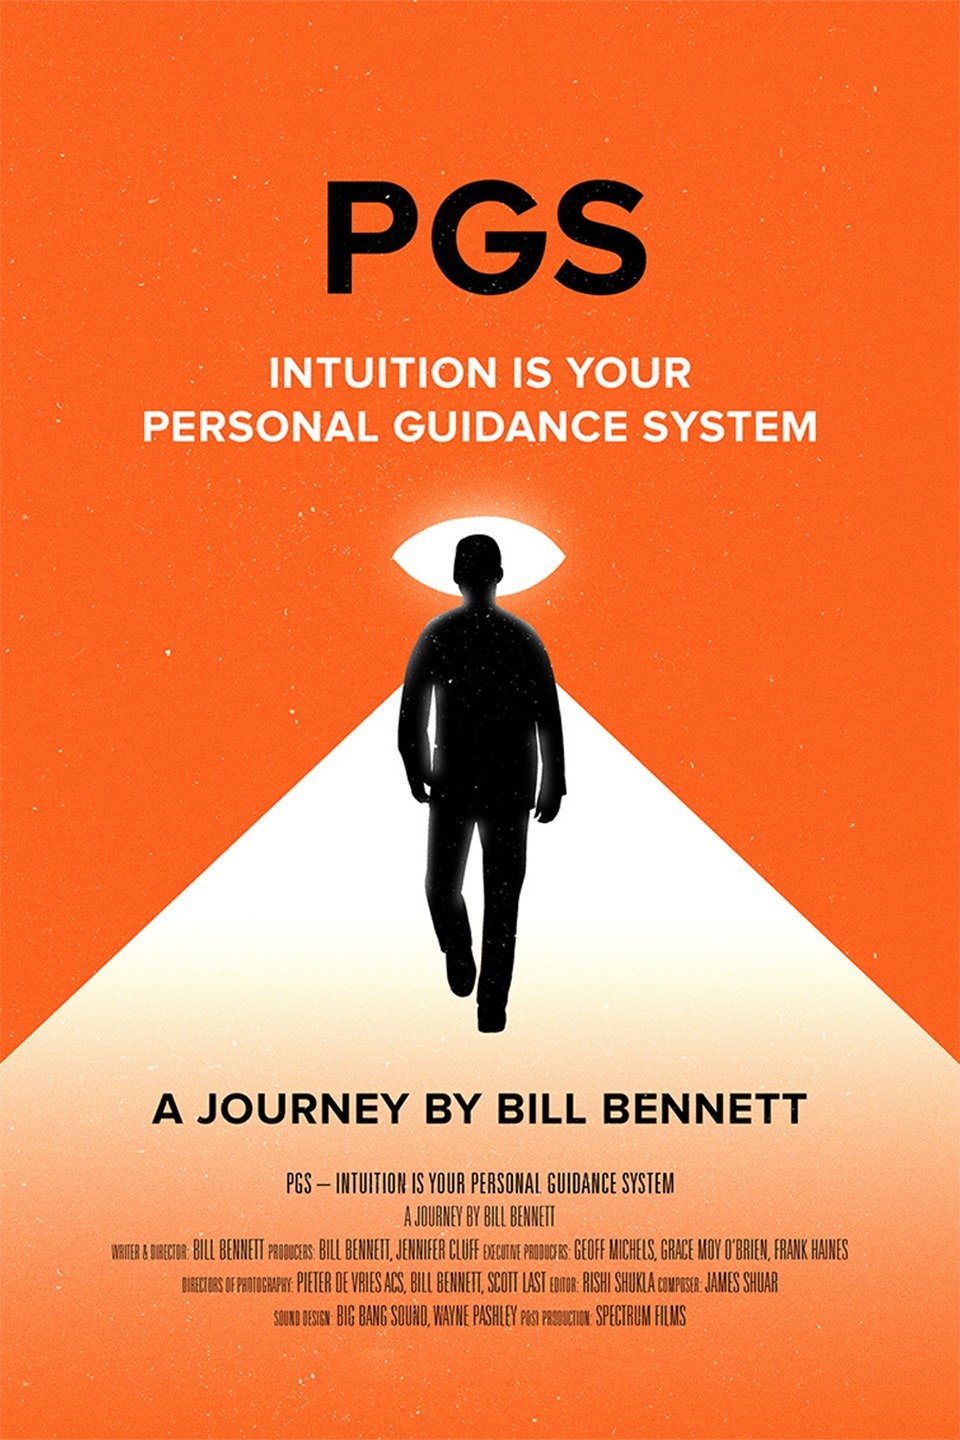 PGS Intuition Is Your Personal Guidance System